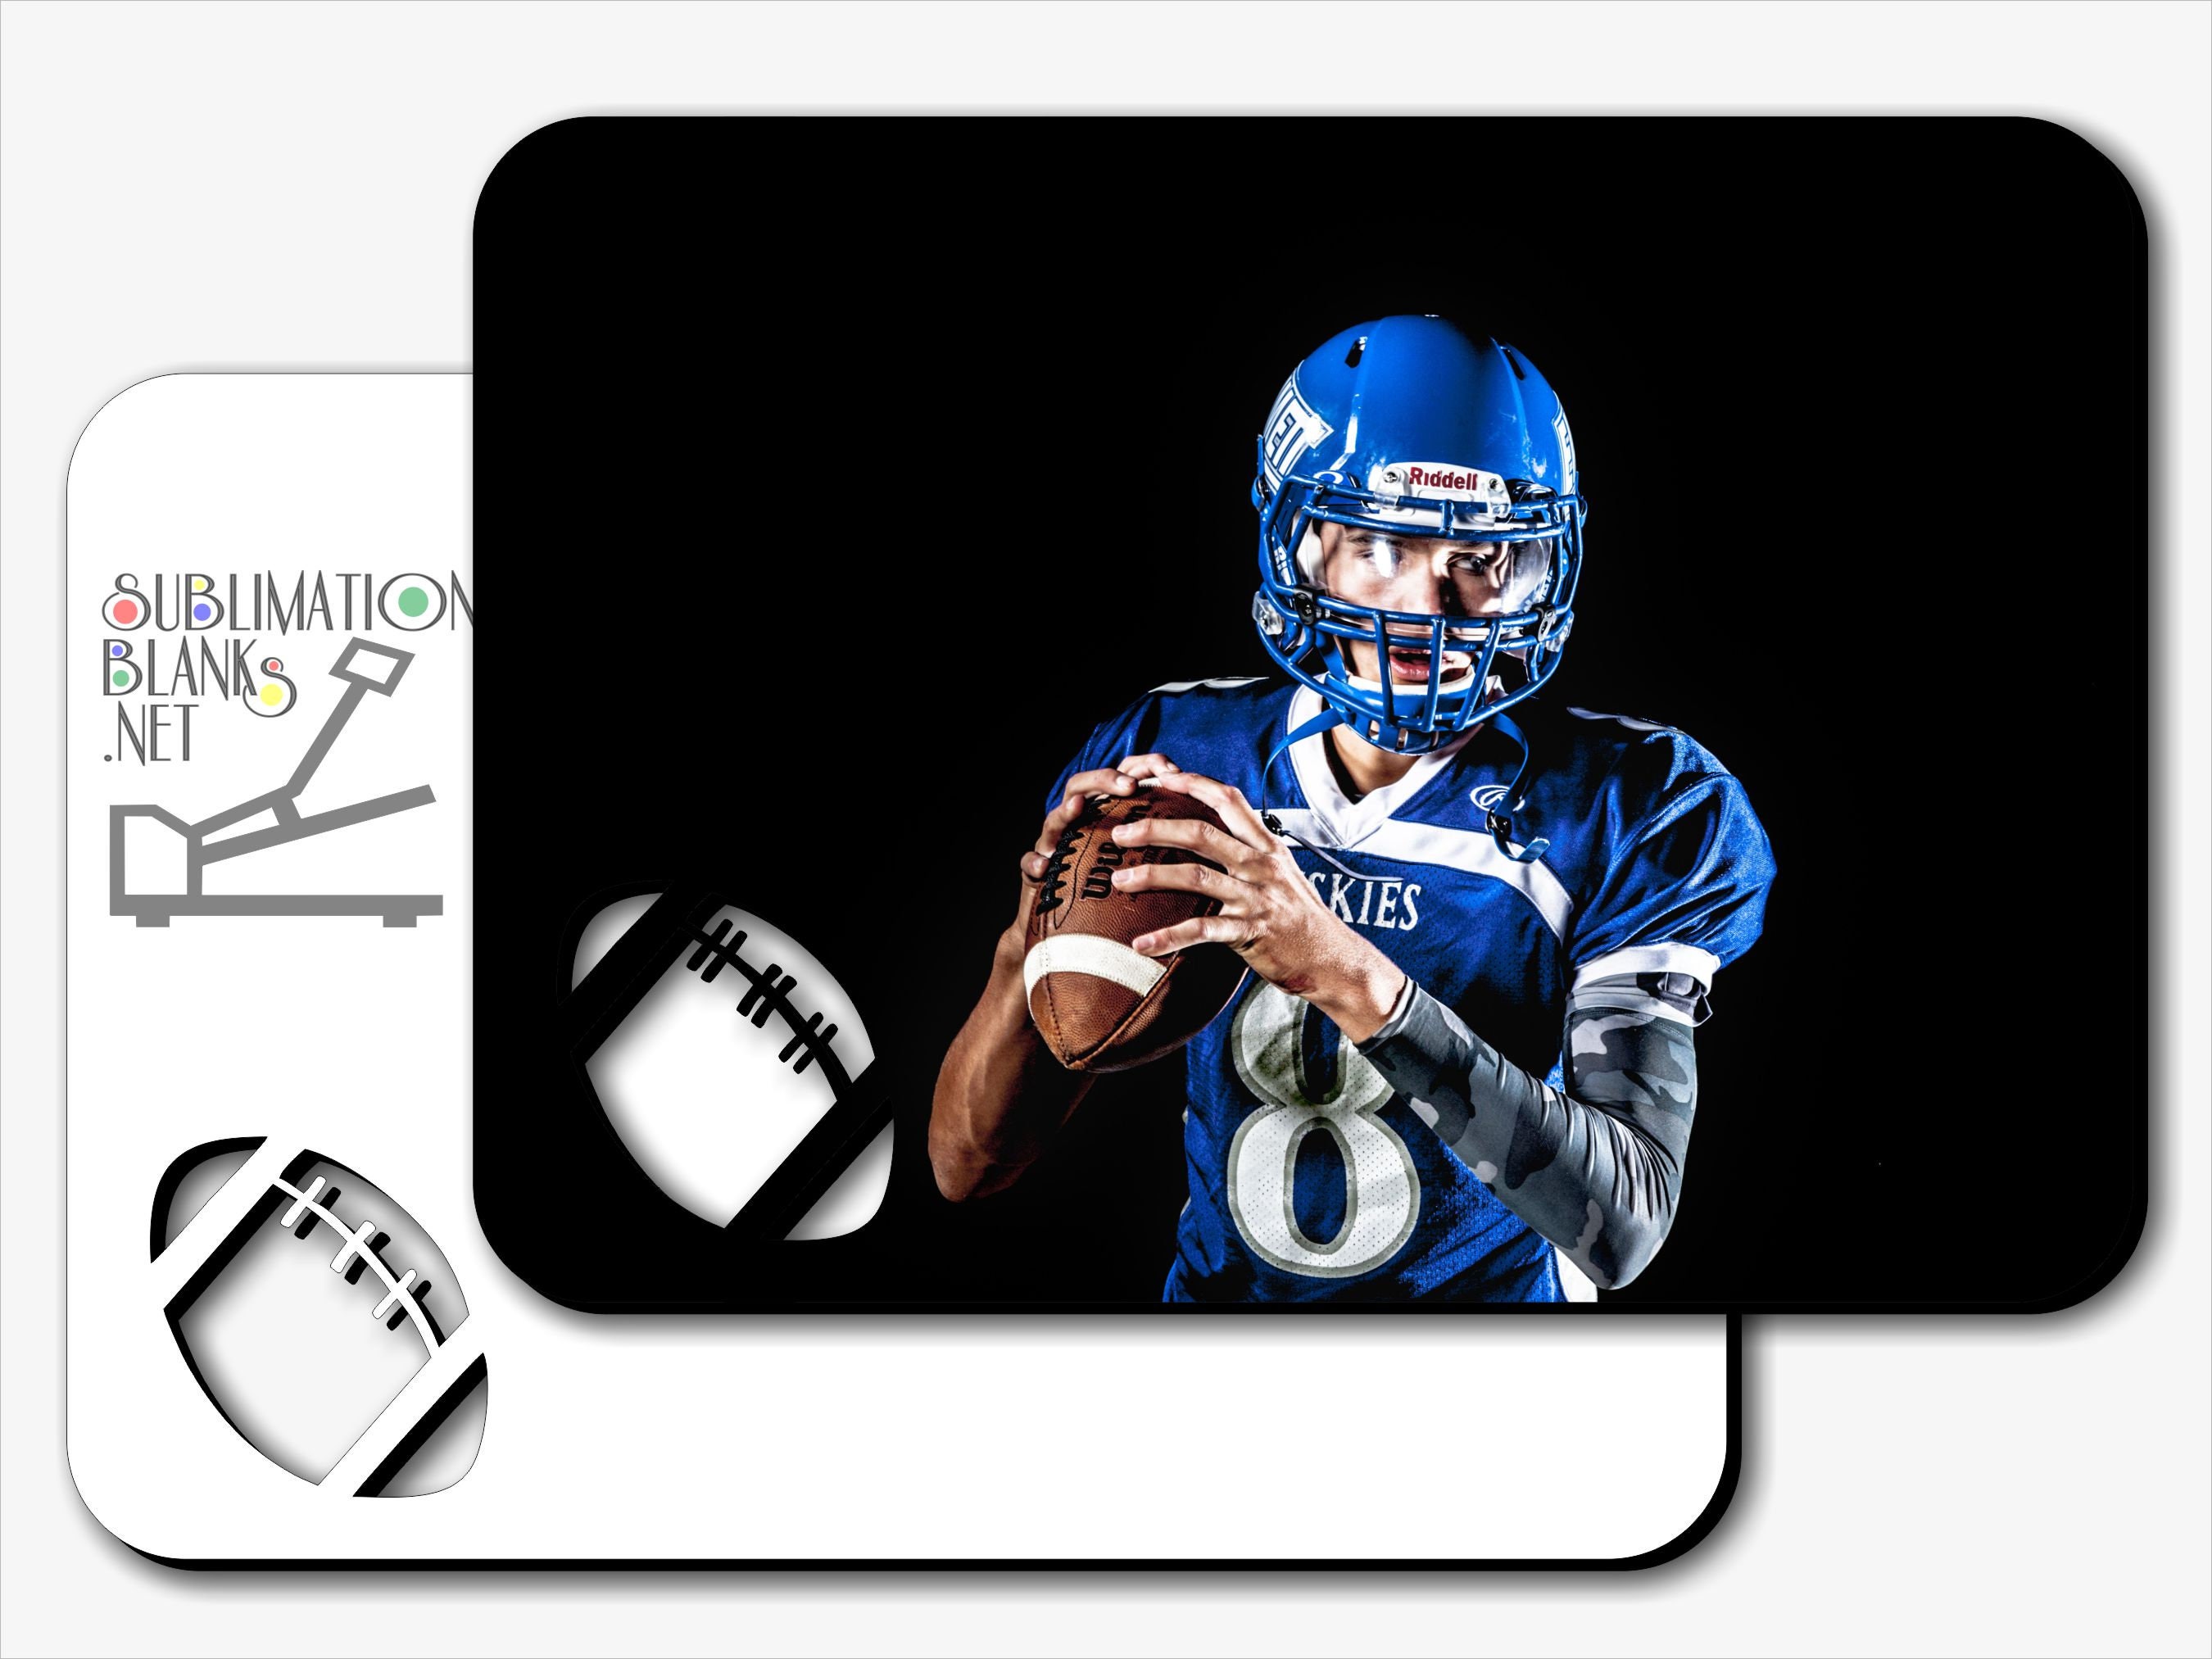 gifts Sports Picture Frame gifts for her FOOTBALL Sublimation Blanks home decor no words gifts for him Landscape Photo Frames